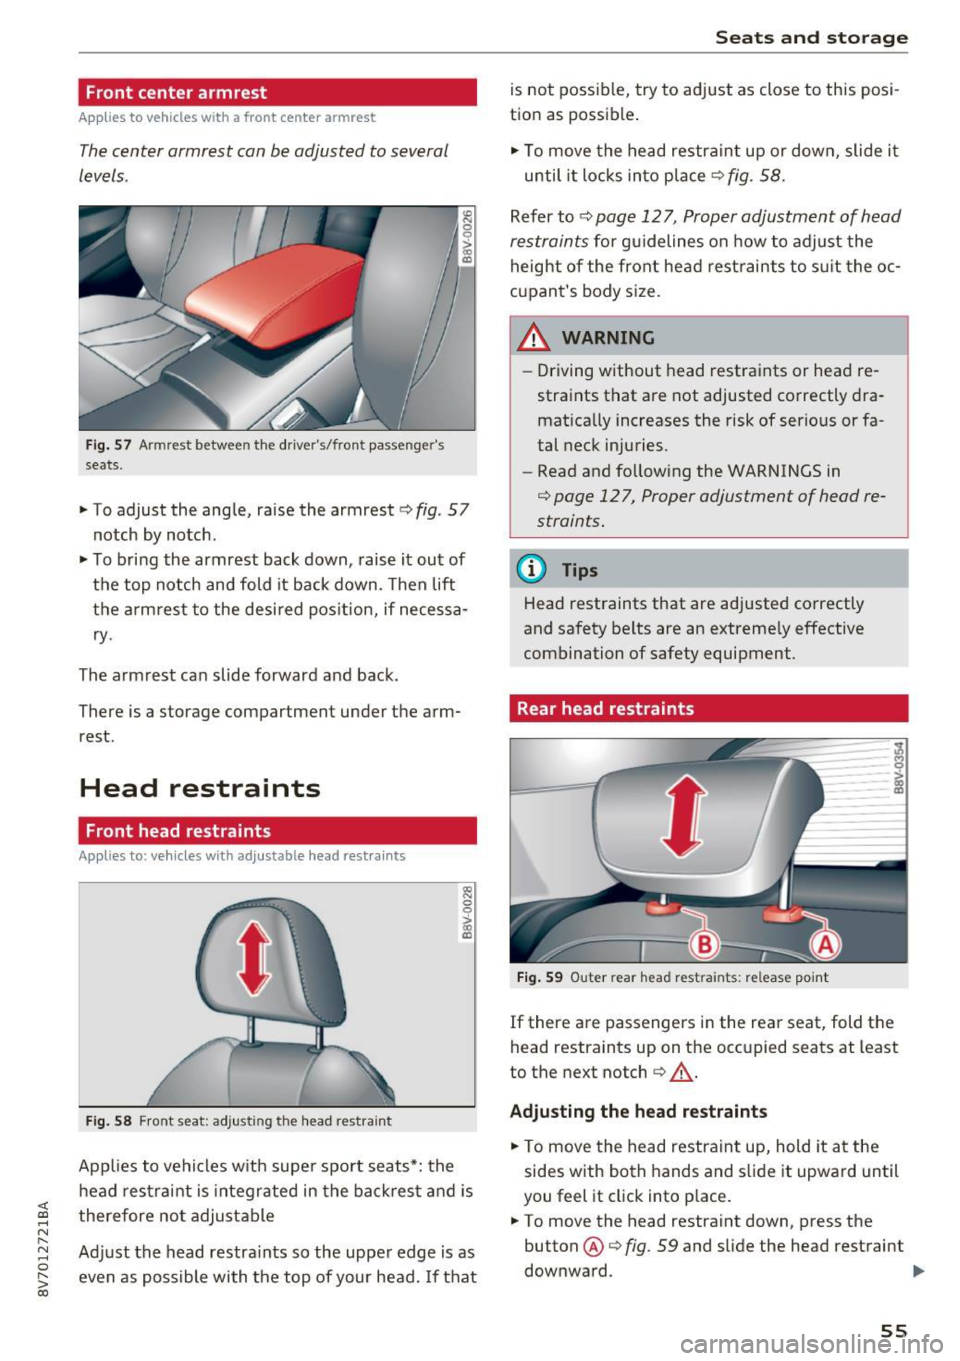 AUDI A3 CABRIOLET 2016  Owners Manual <( co ..... N 
" N ..... 0 r--. > 00 
Front center  armrest 
Applies  to  vehicles with  a front  center  armrest 
The center  armrest  can be  adjusted  to  several 
levels. 
Fig . 57 Armrest  betwee